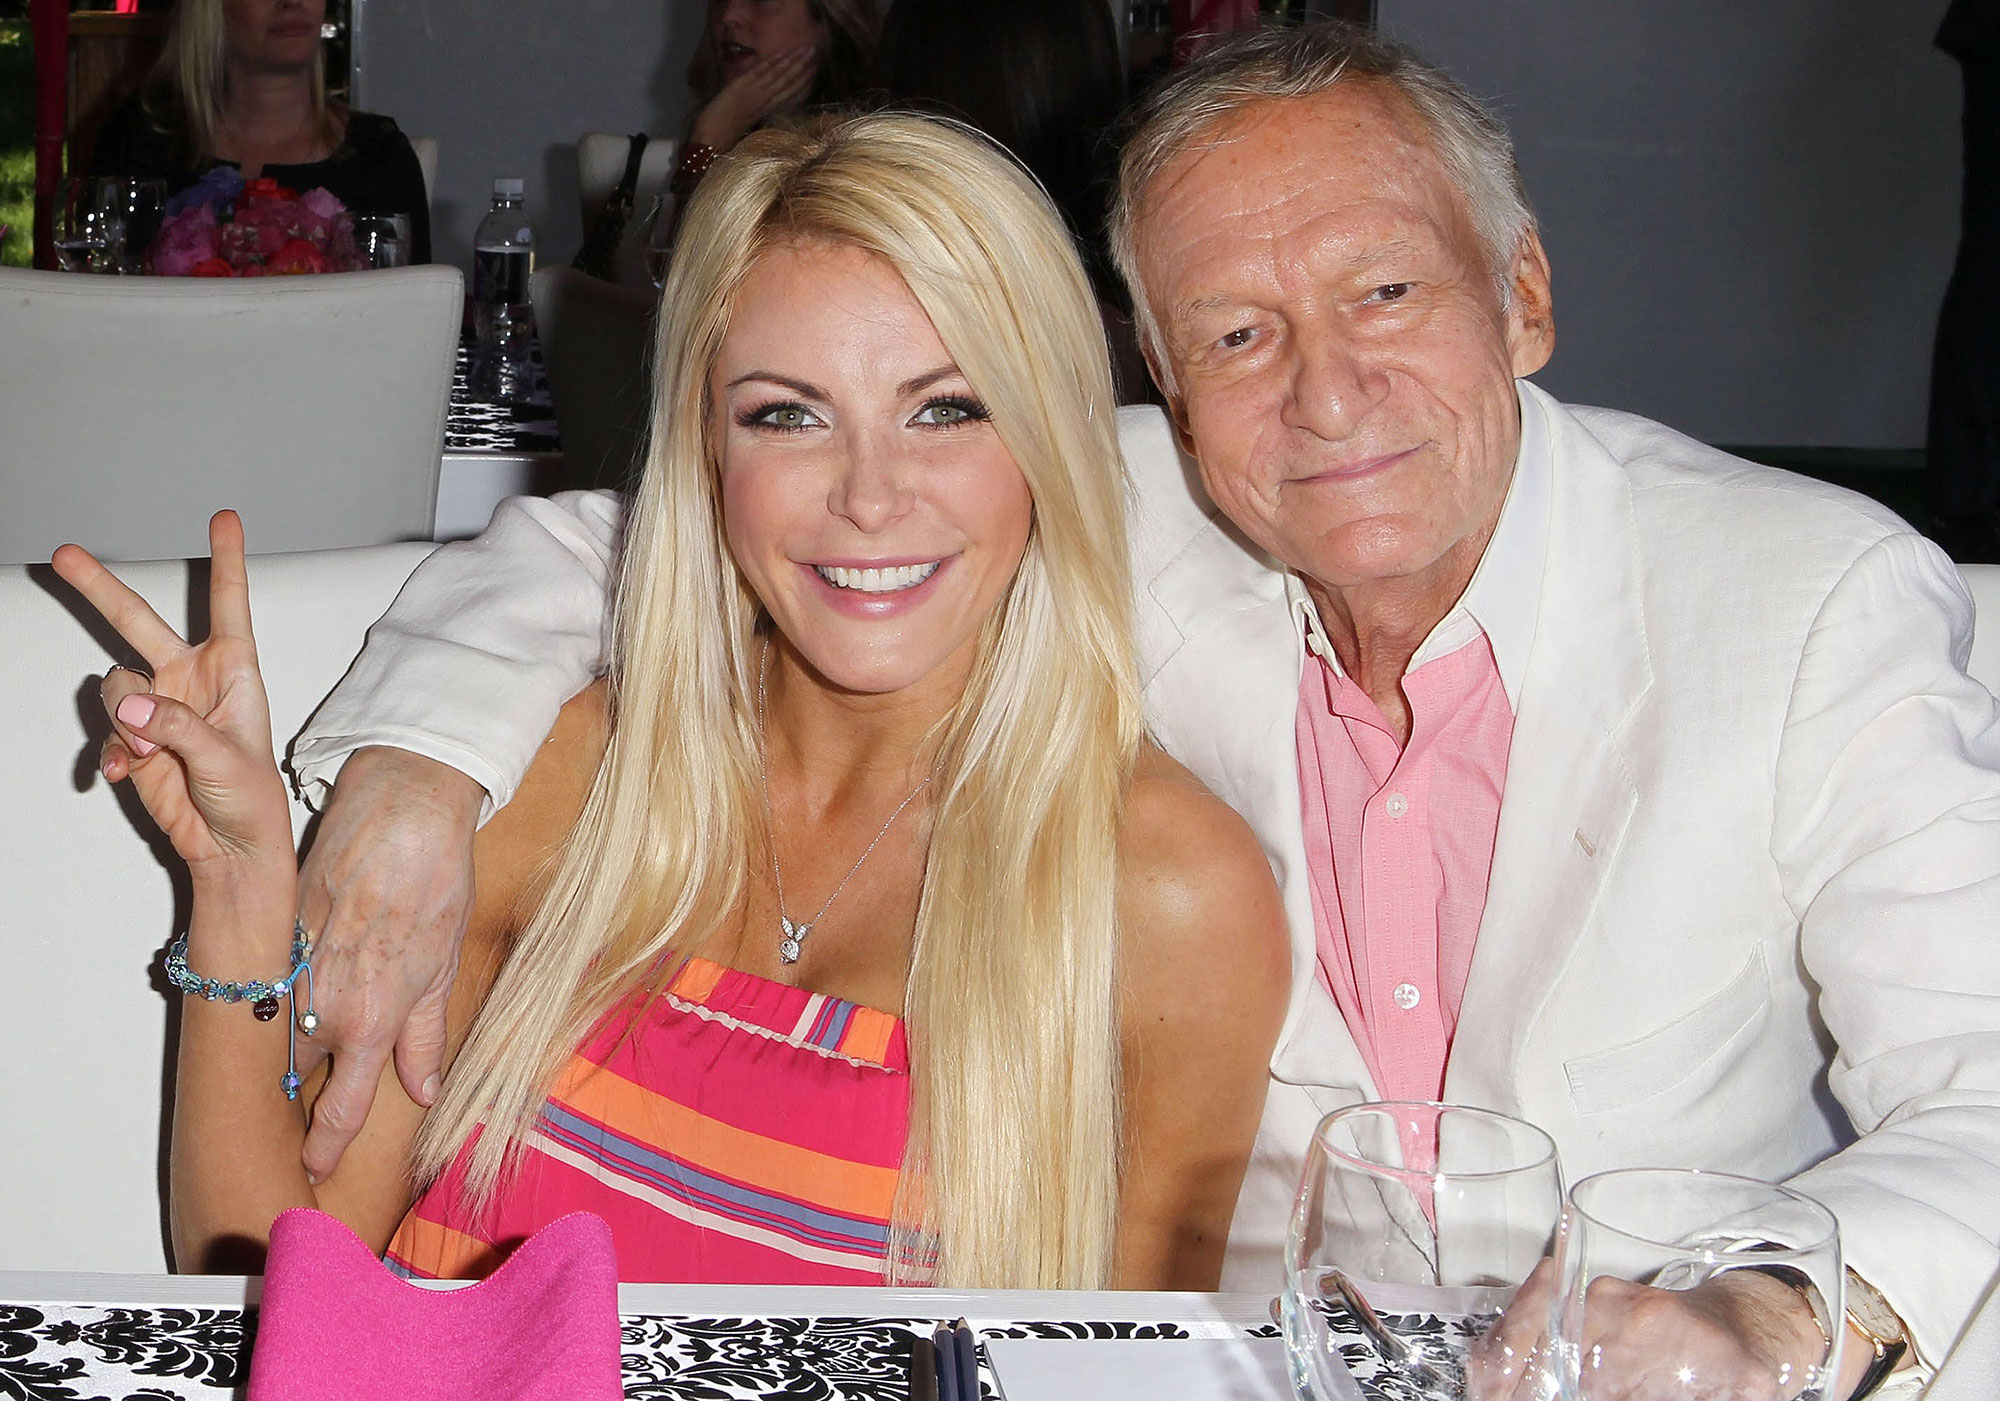 Kcr Sex Videos - Crystal Hefner: Hugh's Exes 'Wouldn't Be Where They Were' Without Him